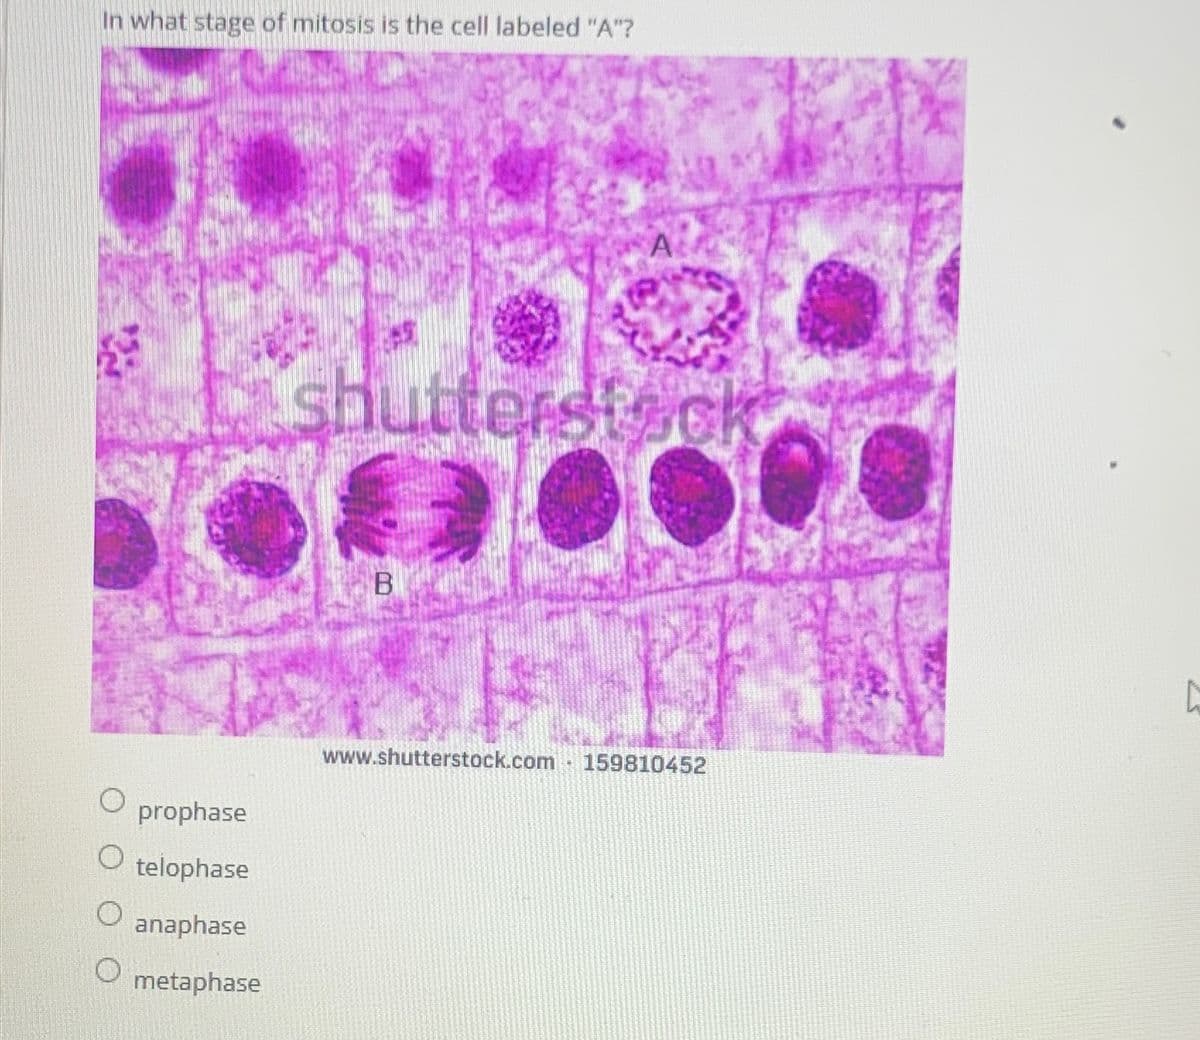 In what stage of mitosis is the cell labeled "A"?
A
shutterstock
B
www.shutterstock.com 159810452
O
prophase
O
telophase
anaphase
O
metaphase